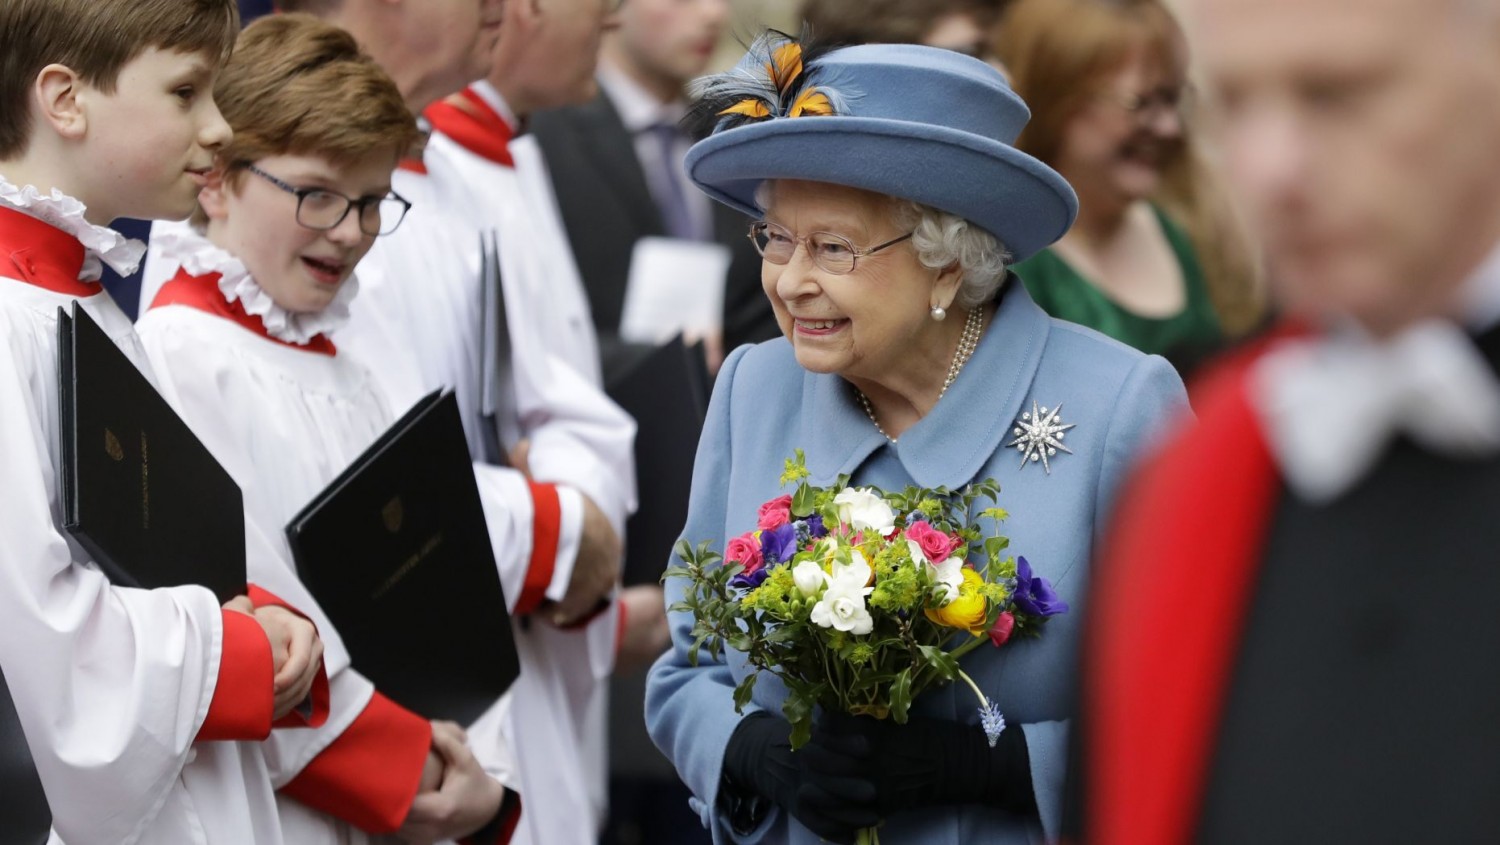 Britain's Queen Elizabeth II leaves after attending the annual Commonwealth Day service at Westminster Abbey in London on March 9. (AP Photo/Kirsty Wigglesworth)